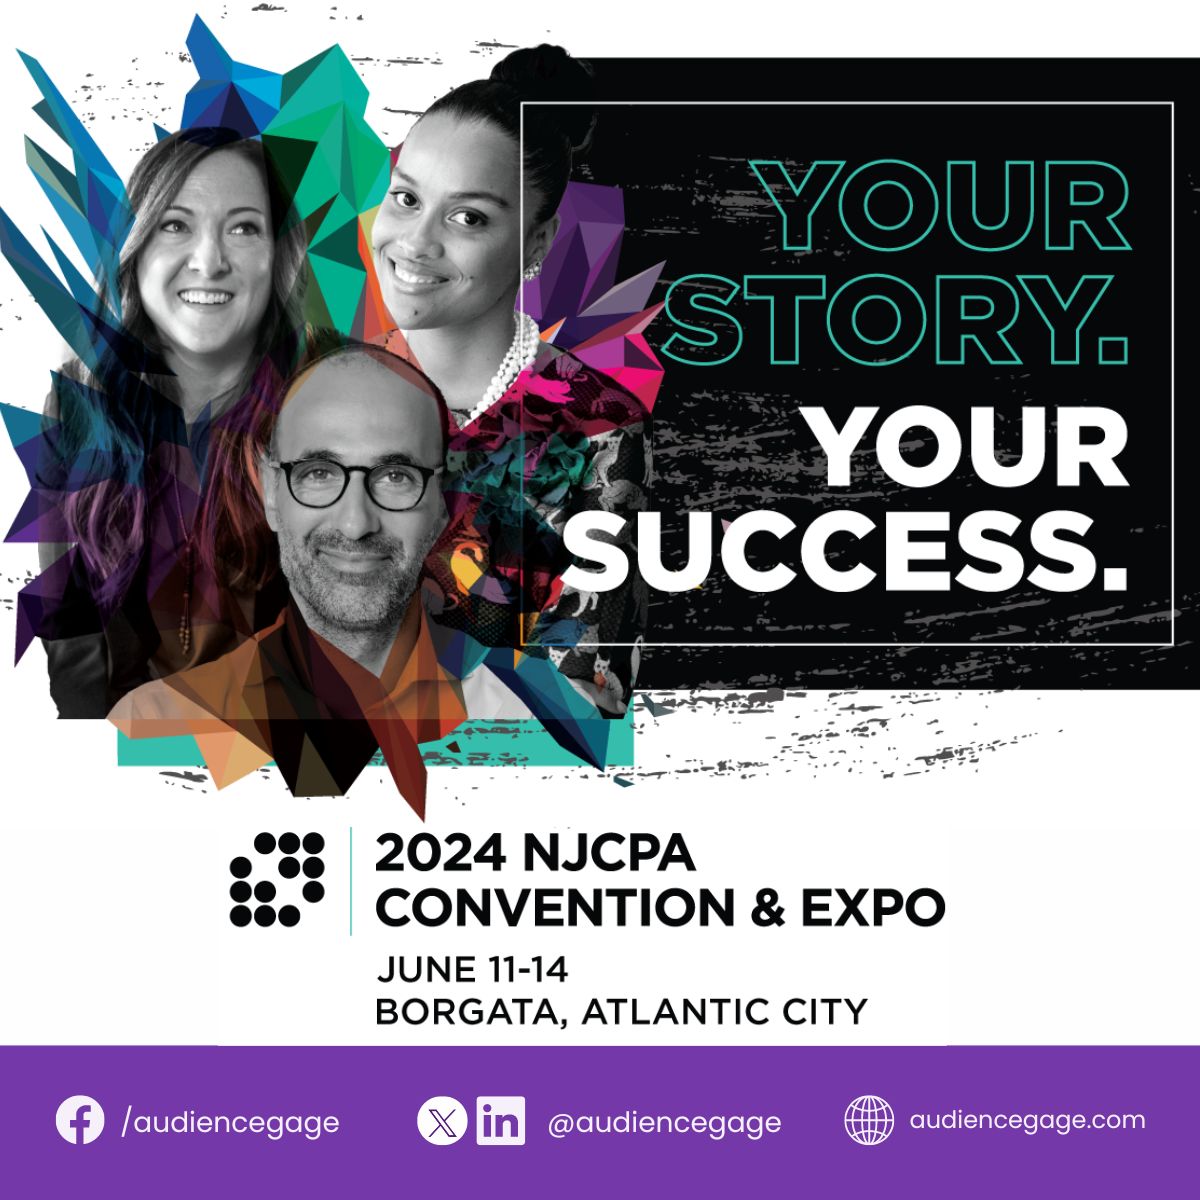 Unlock your #successstory at the 2024 @NJCPA Convention & Expo from June 11-14 at Borgata, Atlantic City. Embrace the power of storytelling for career and life impact. Featuring: @ACTLLC @CPACharge @MerchAdvocate @Protexity. Don't miss out! #NJCPAConvention2024 #Storytelling 🚀✨